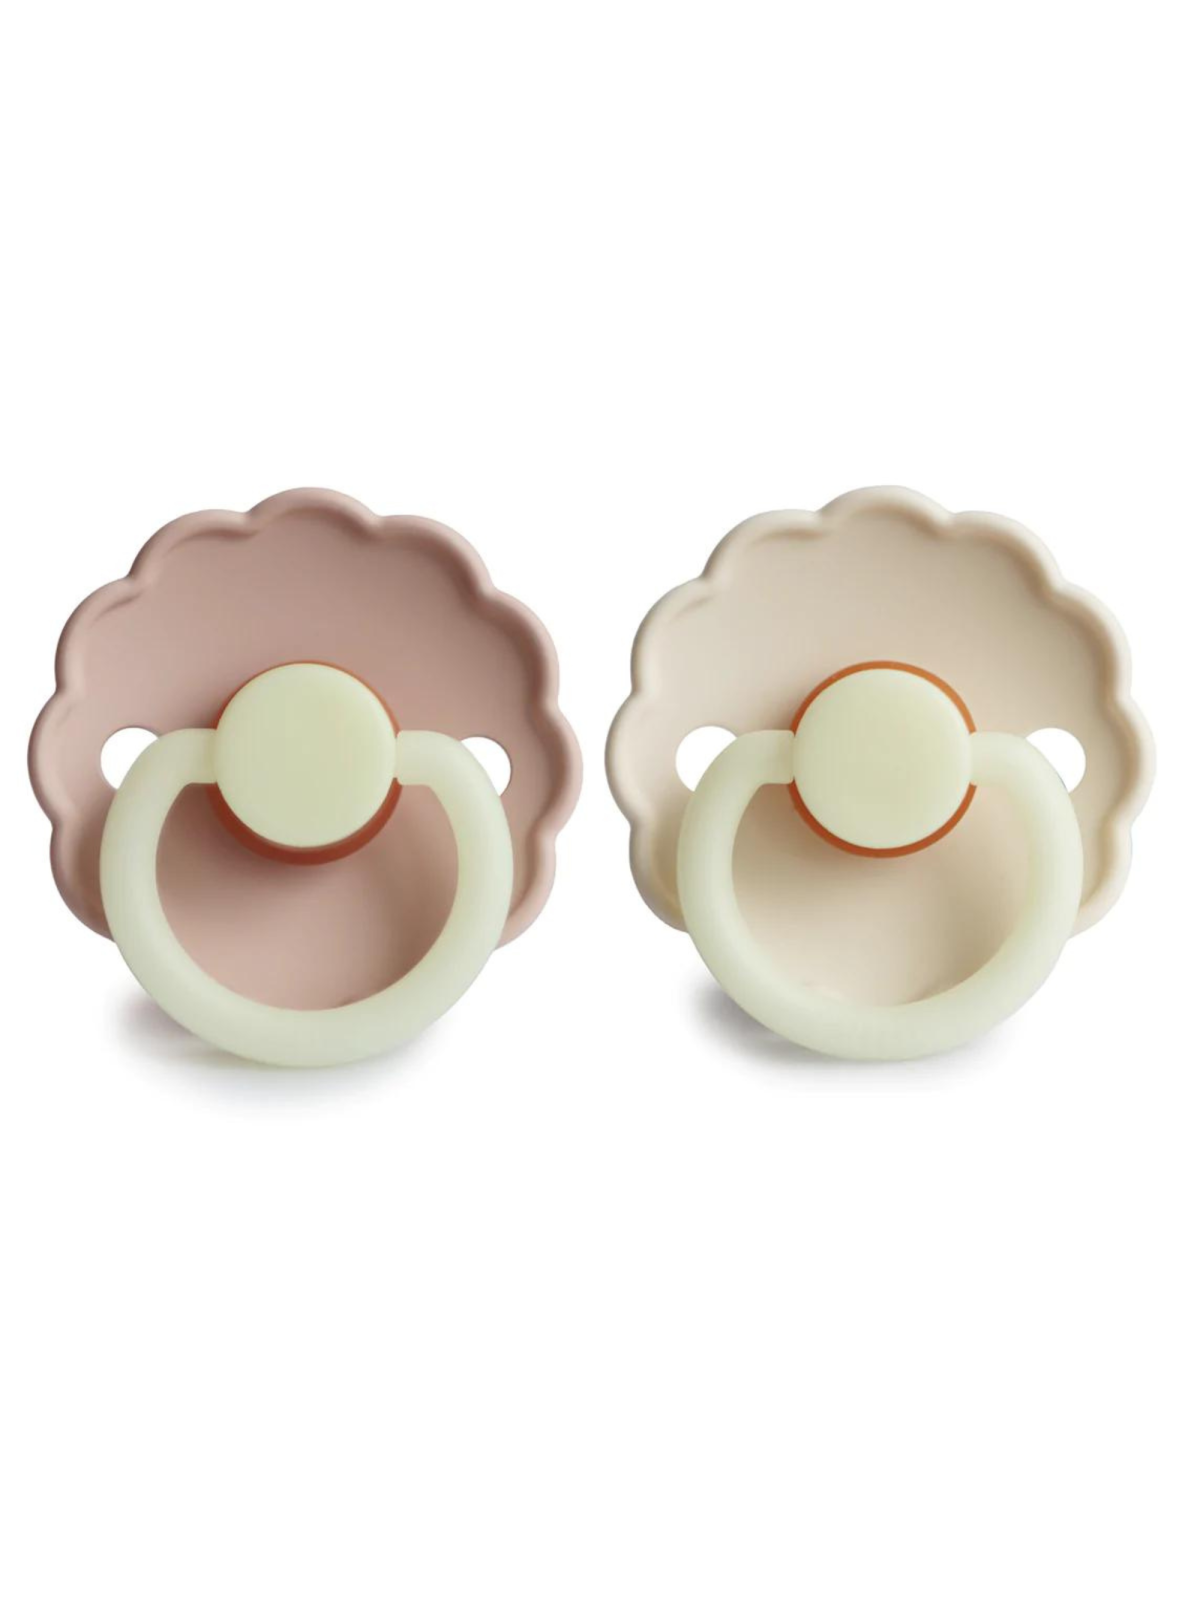 Daisy Night Natural Rubber Pacifier 2-Pack, Blush / Cream